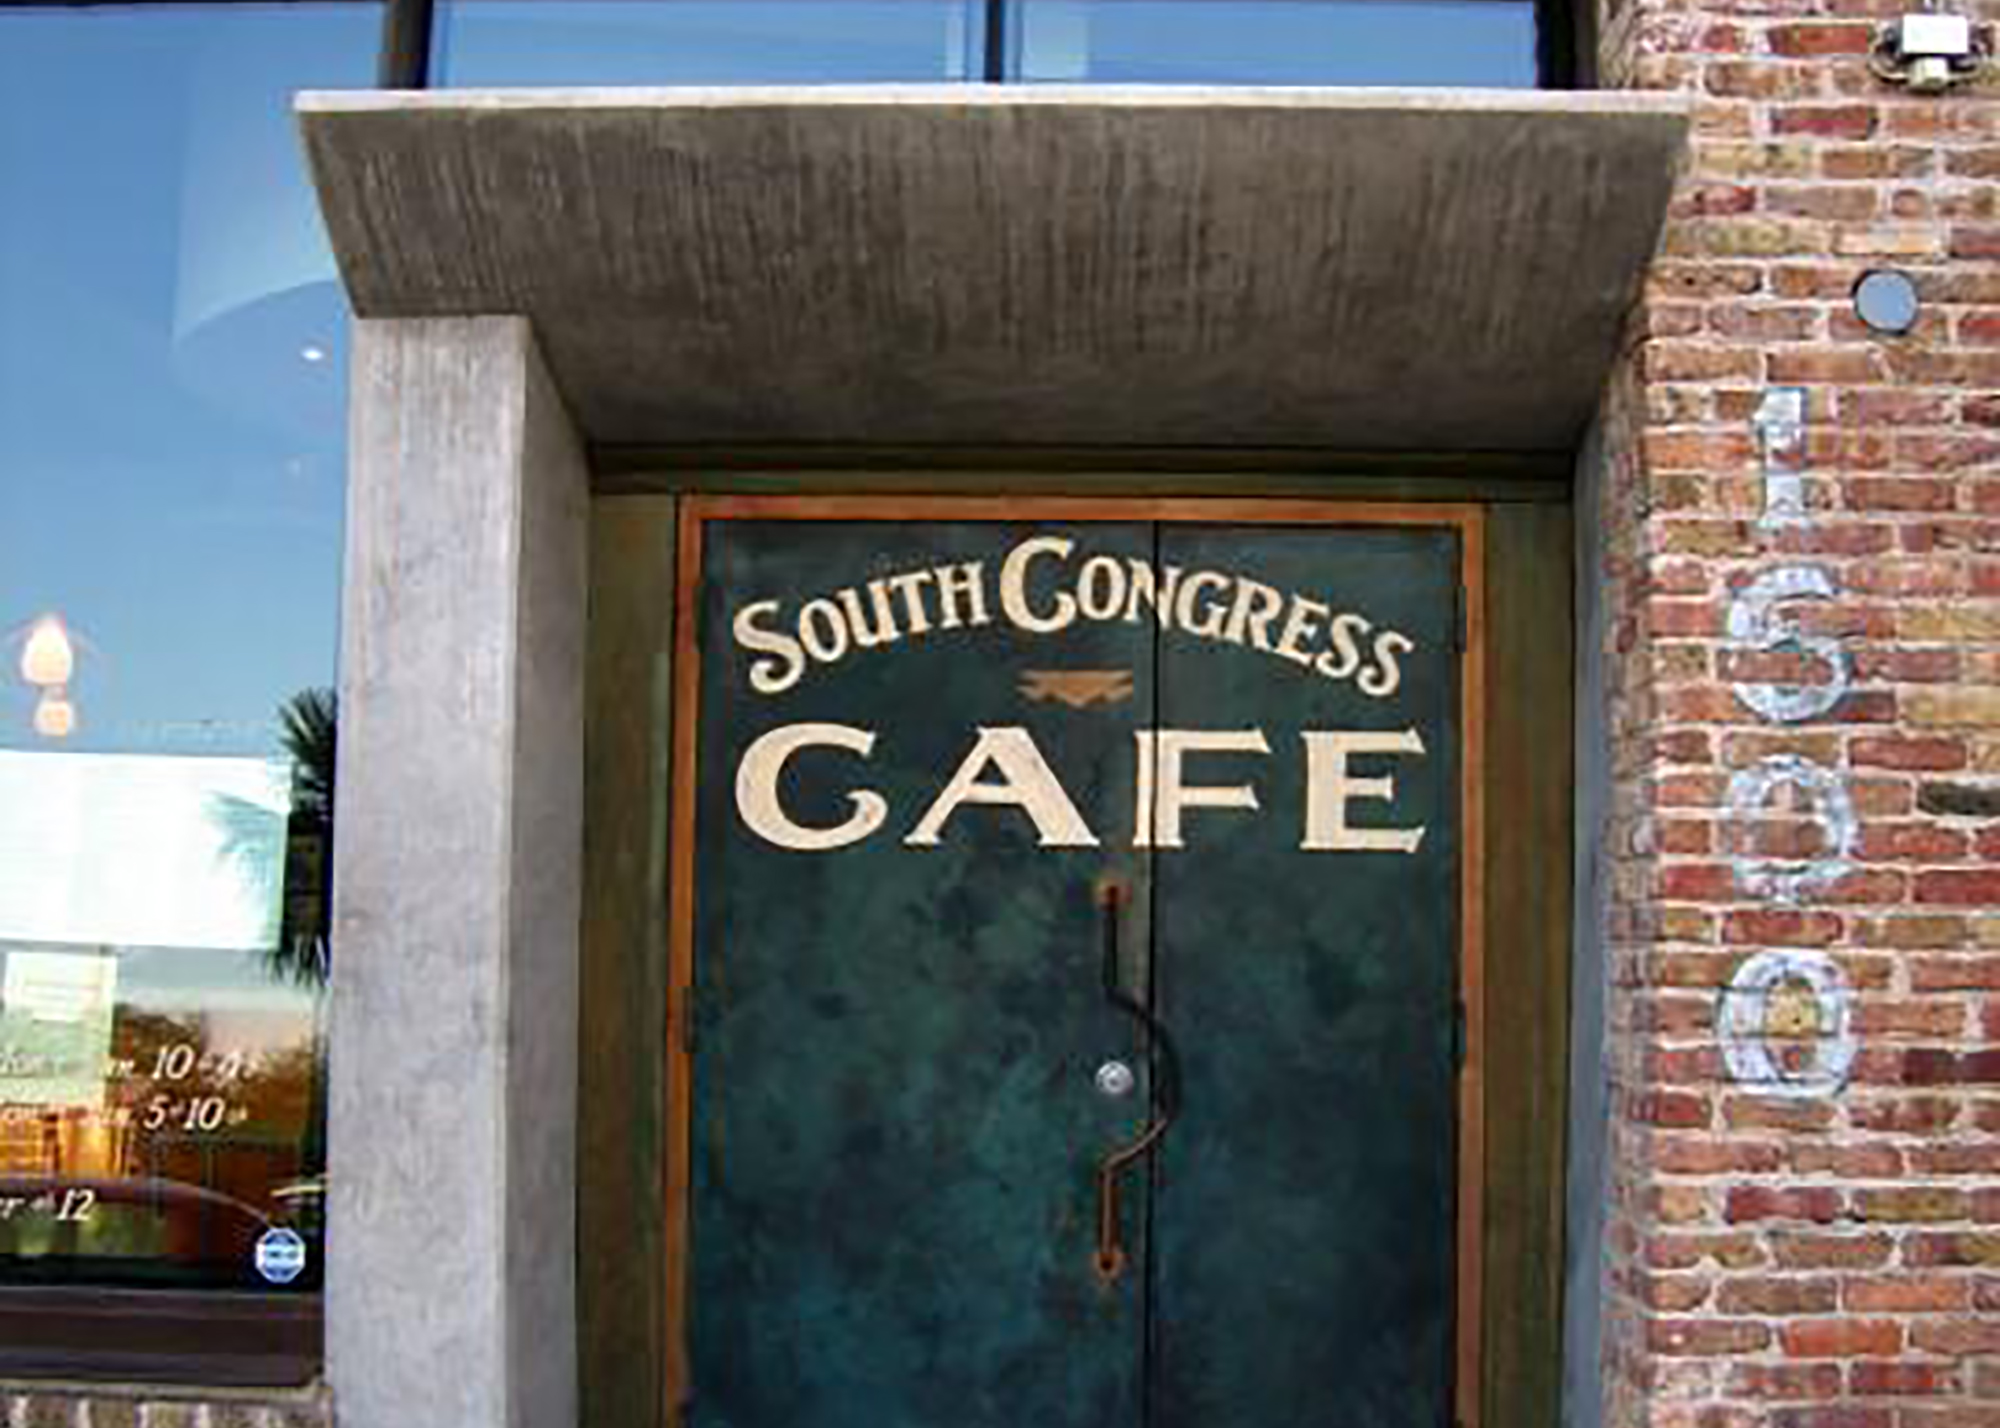 South Congress Cafe sign on door